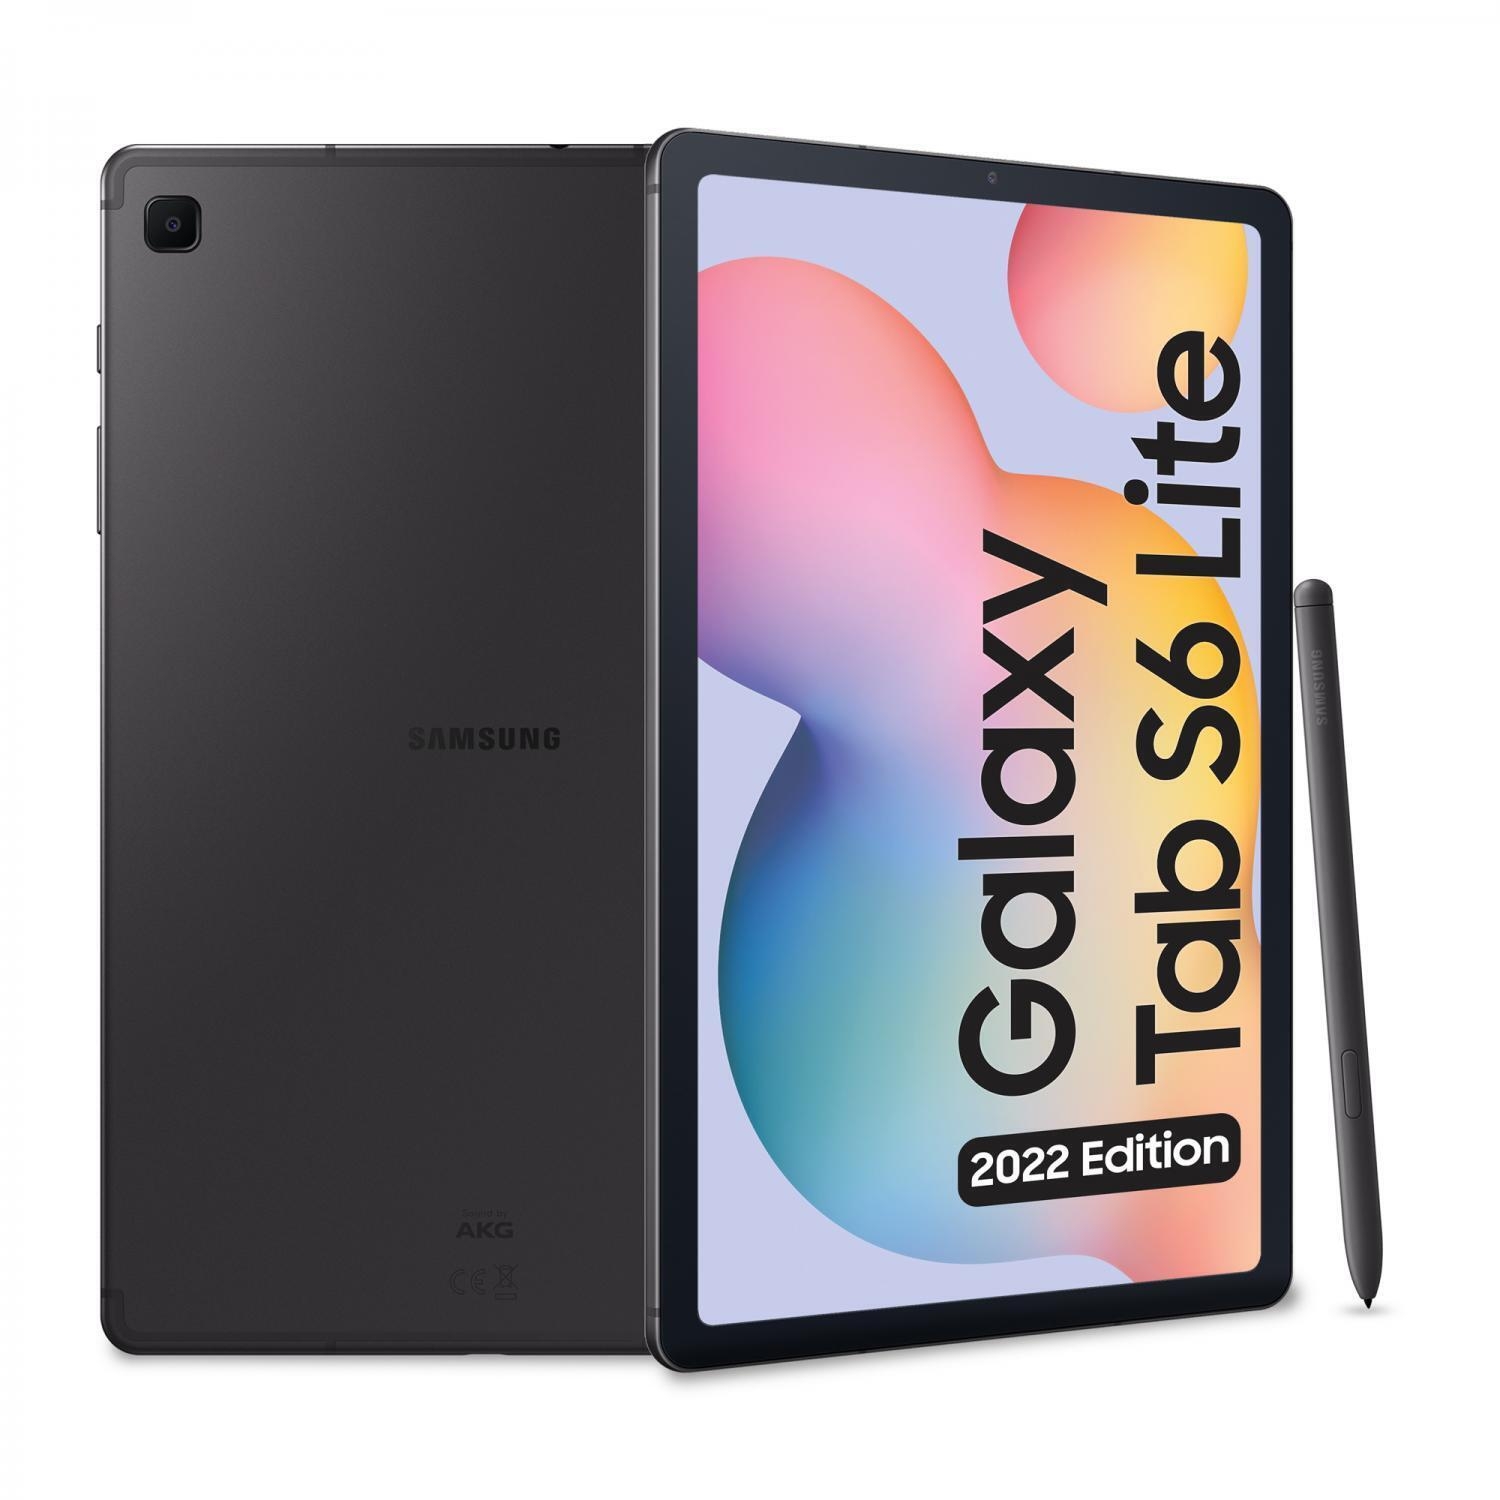 Samsung Galaxy Tab S6 Lite (2022) Tablet Android 10.4 Pollici Lte Ram 4 Gb, 64 G